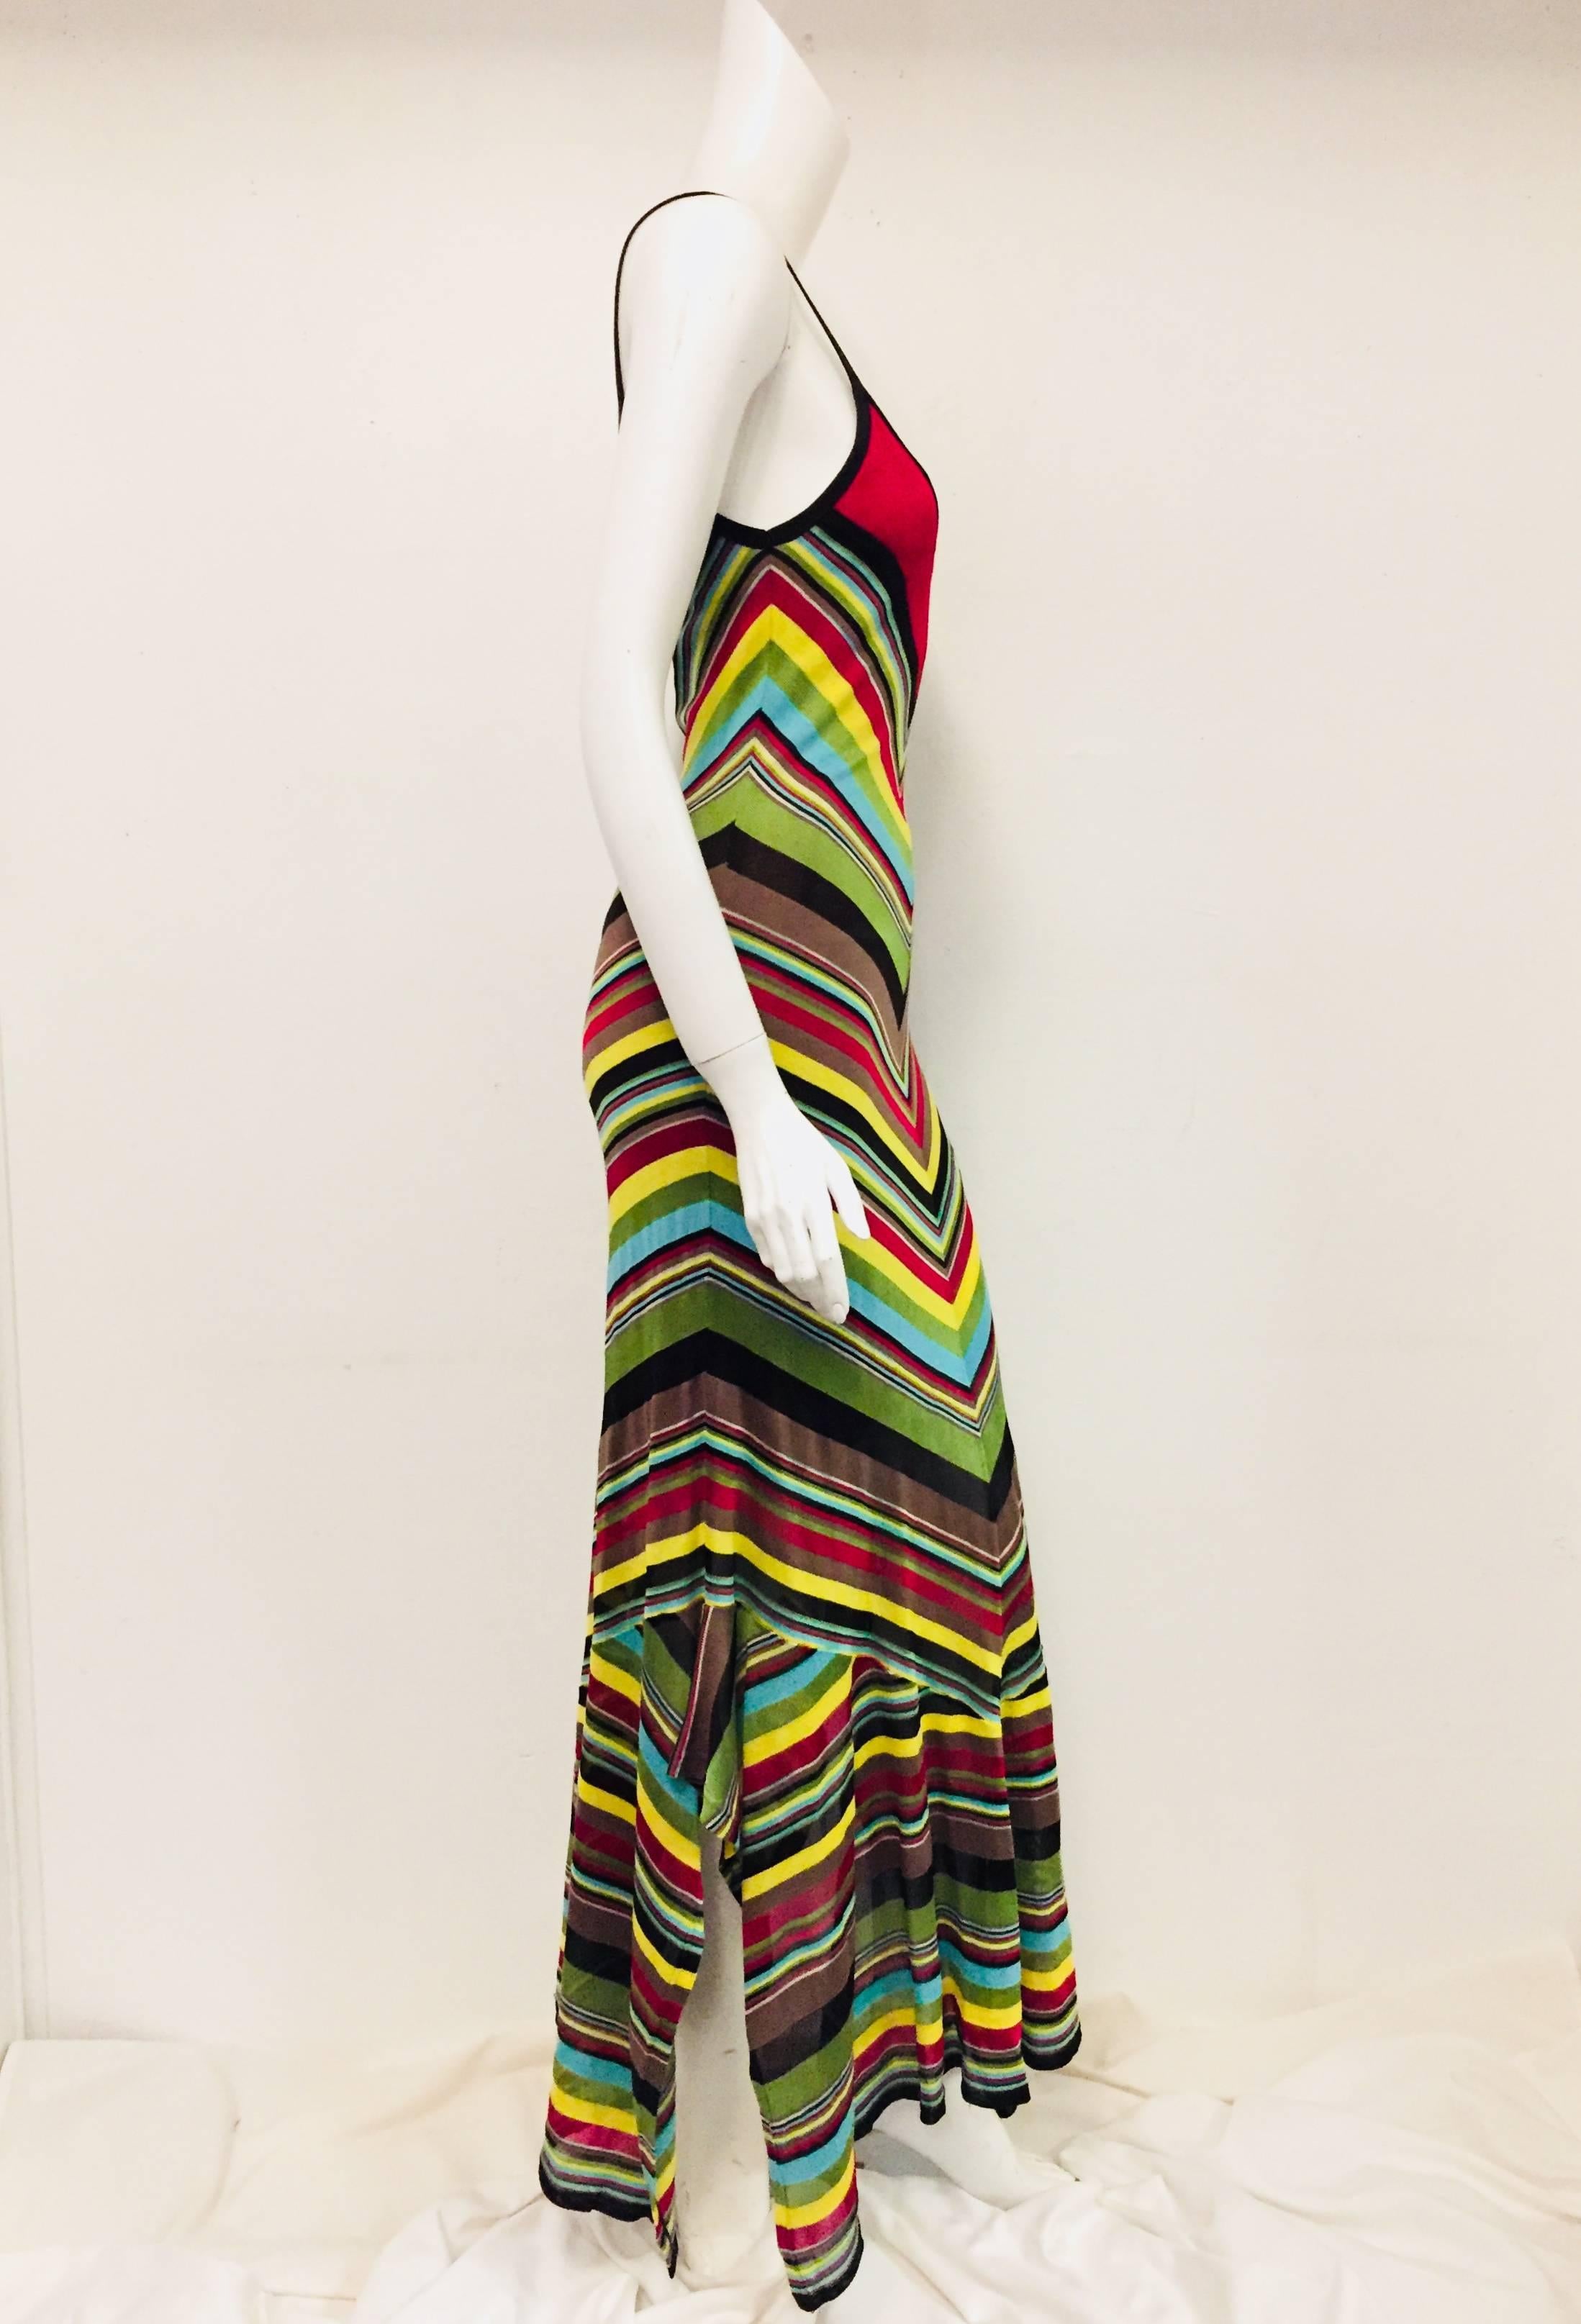 Missoni chevron pattern striped multi color long casual dress is perfect any occasion.  This knit thin strap scooped neck dress is constructed with bold bright colors and the hem is ruffled with openings on both sides.   